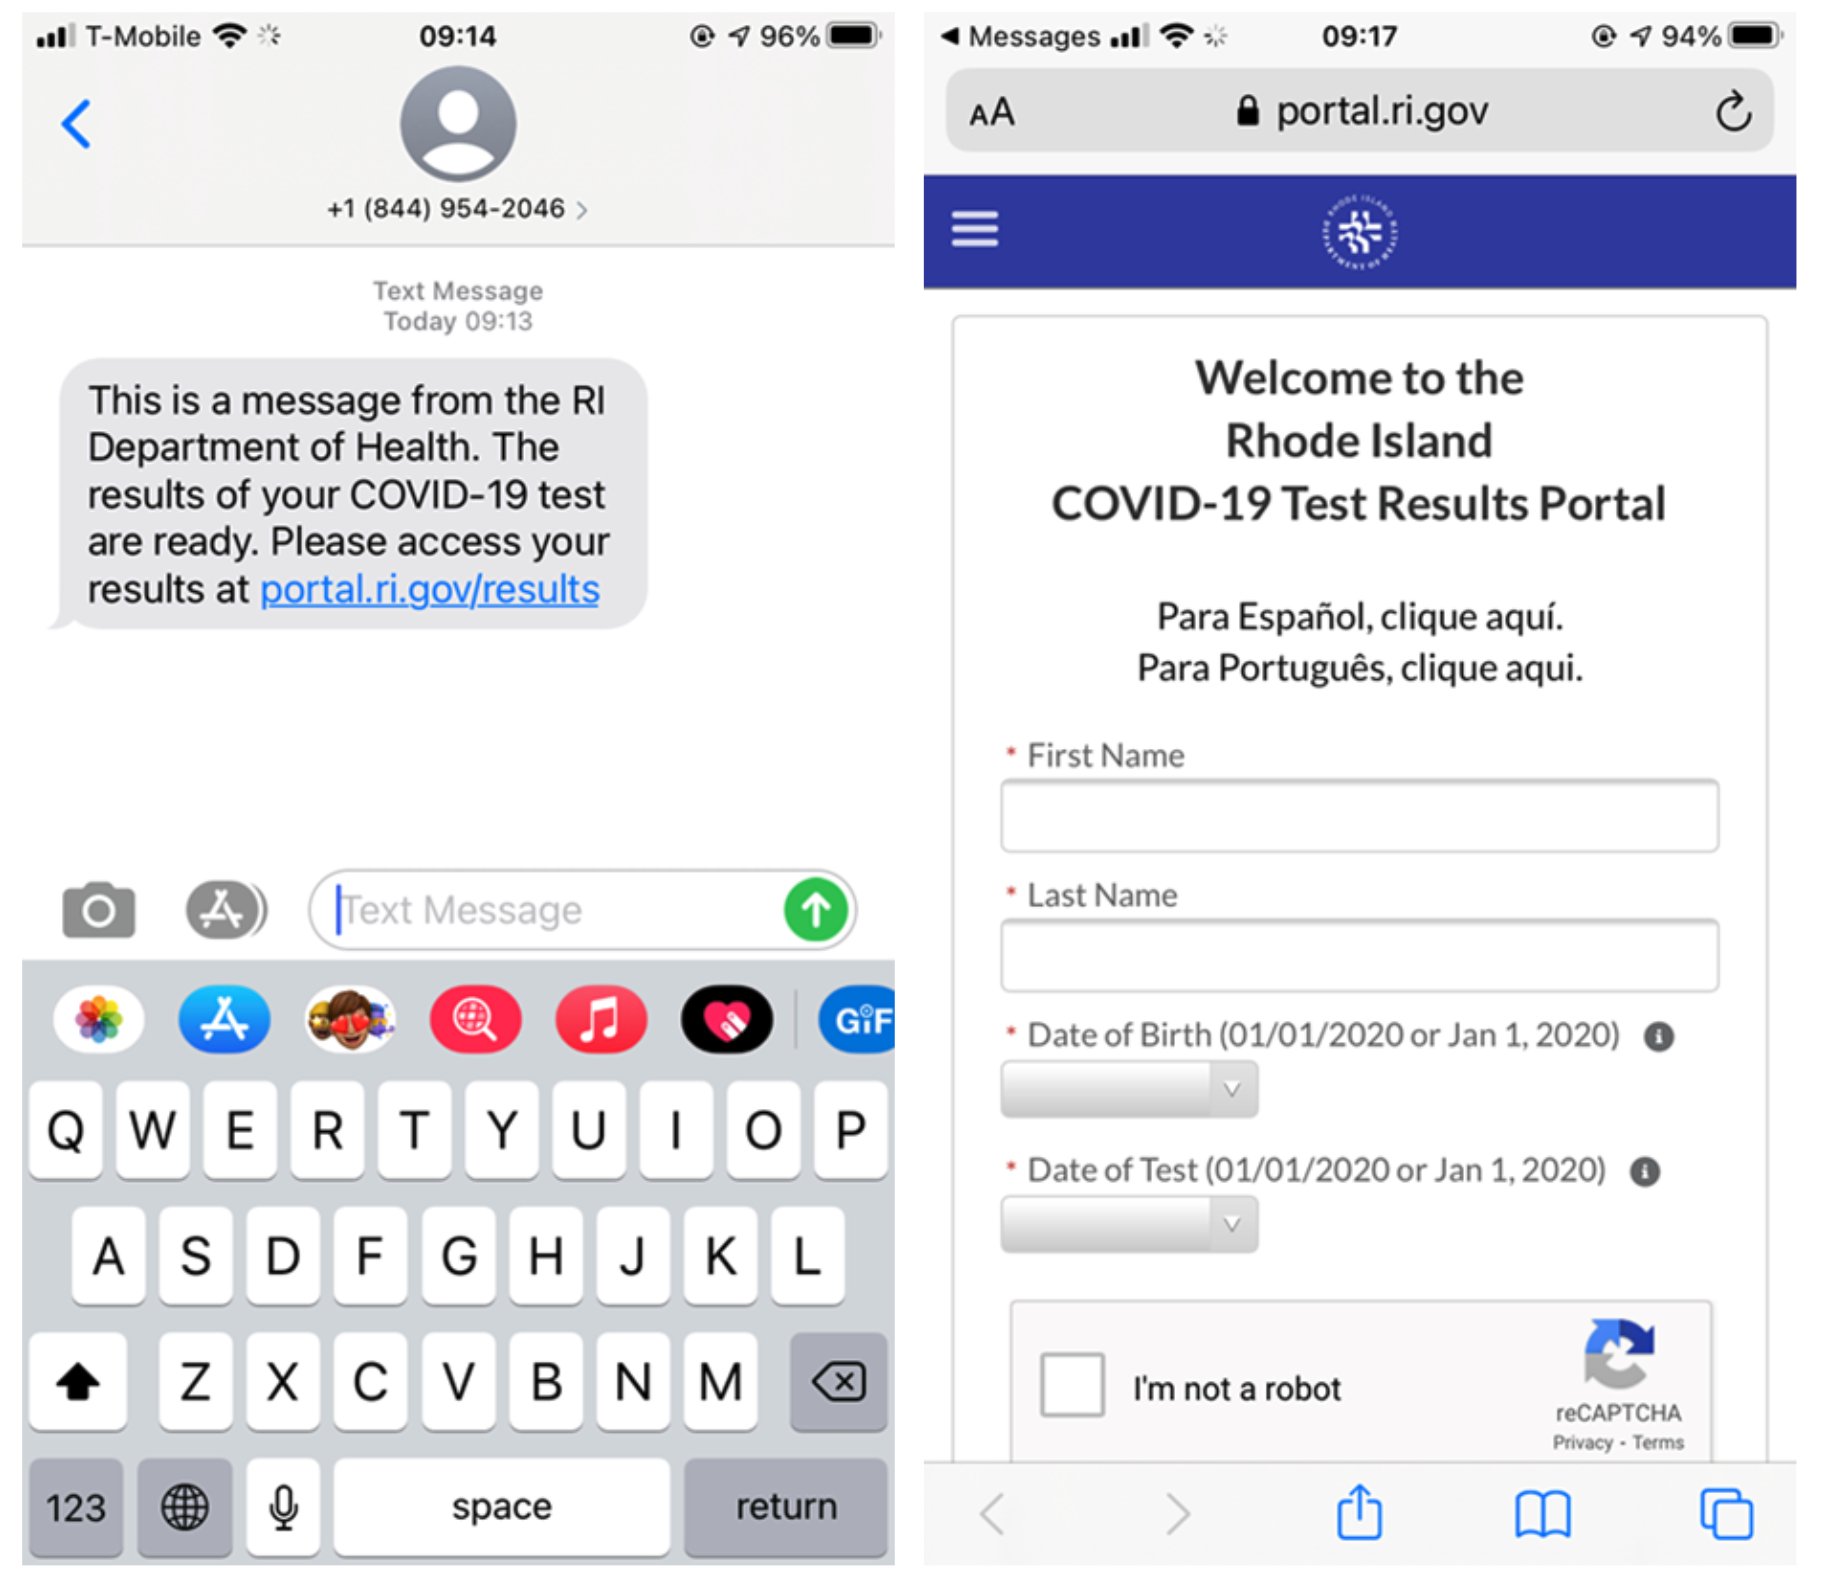 RIDOH text messages: results of your COVID-19 test are ready., OIT